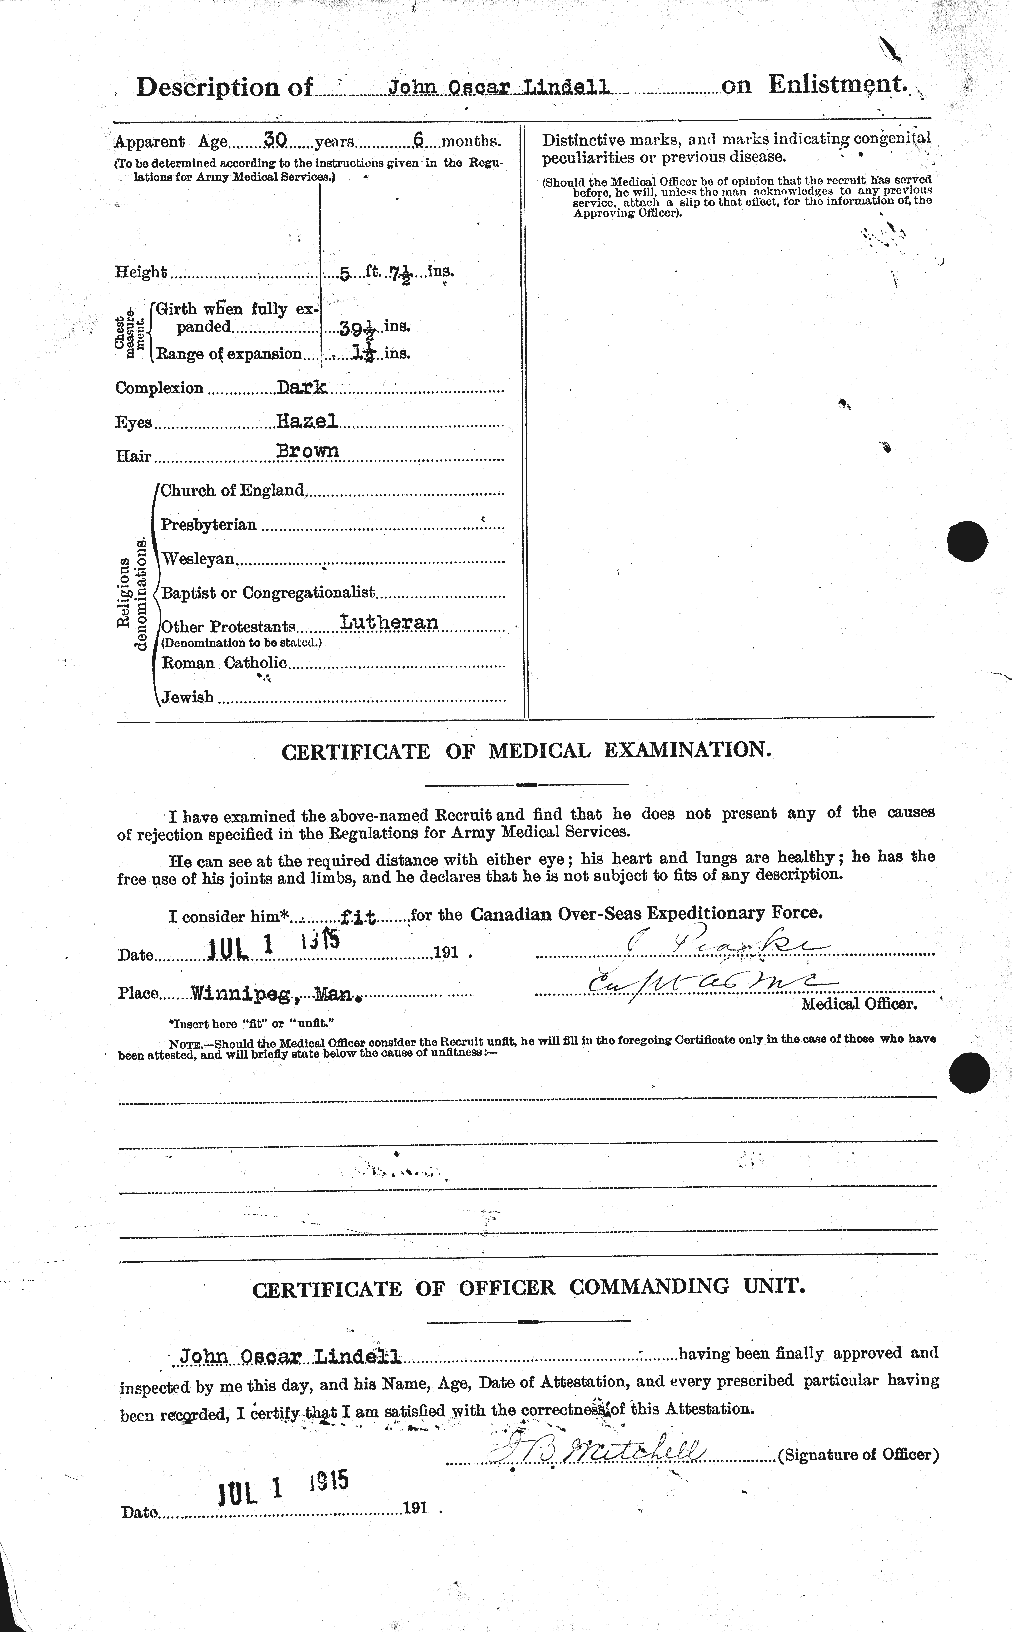 Personnel Records of the First World War - CEF 467689b